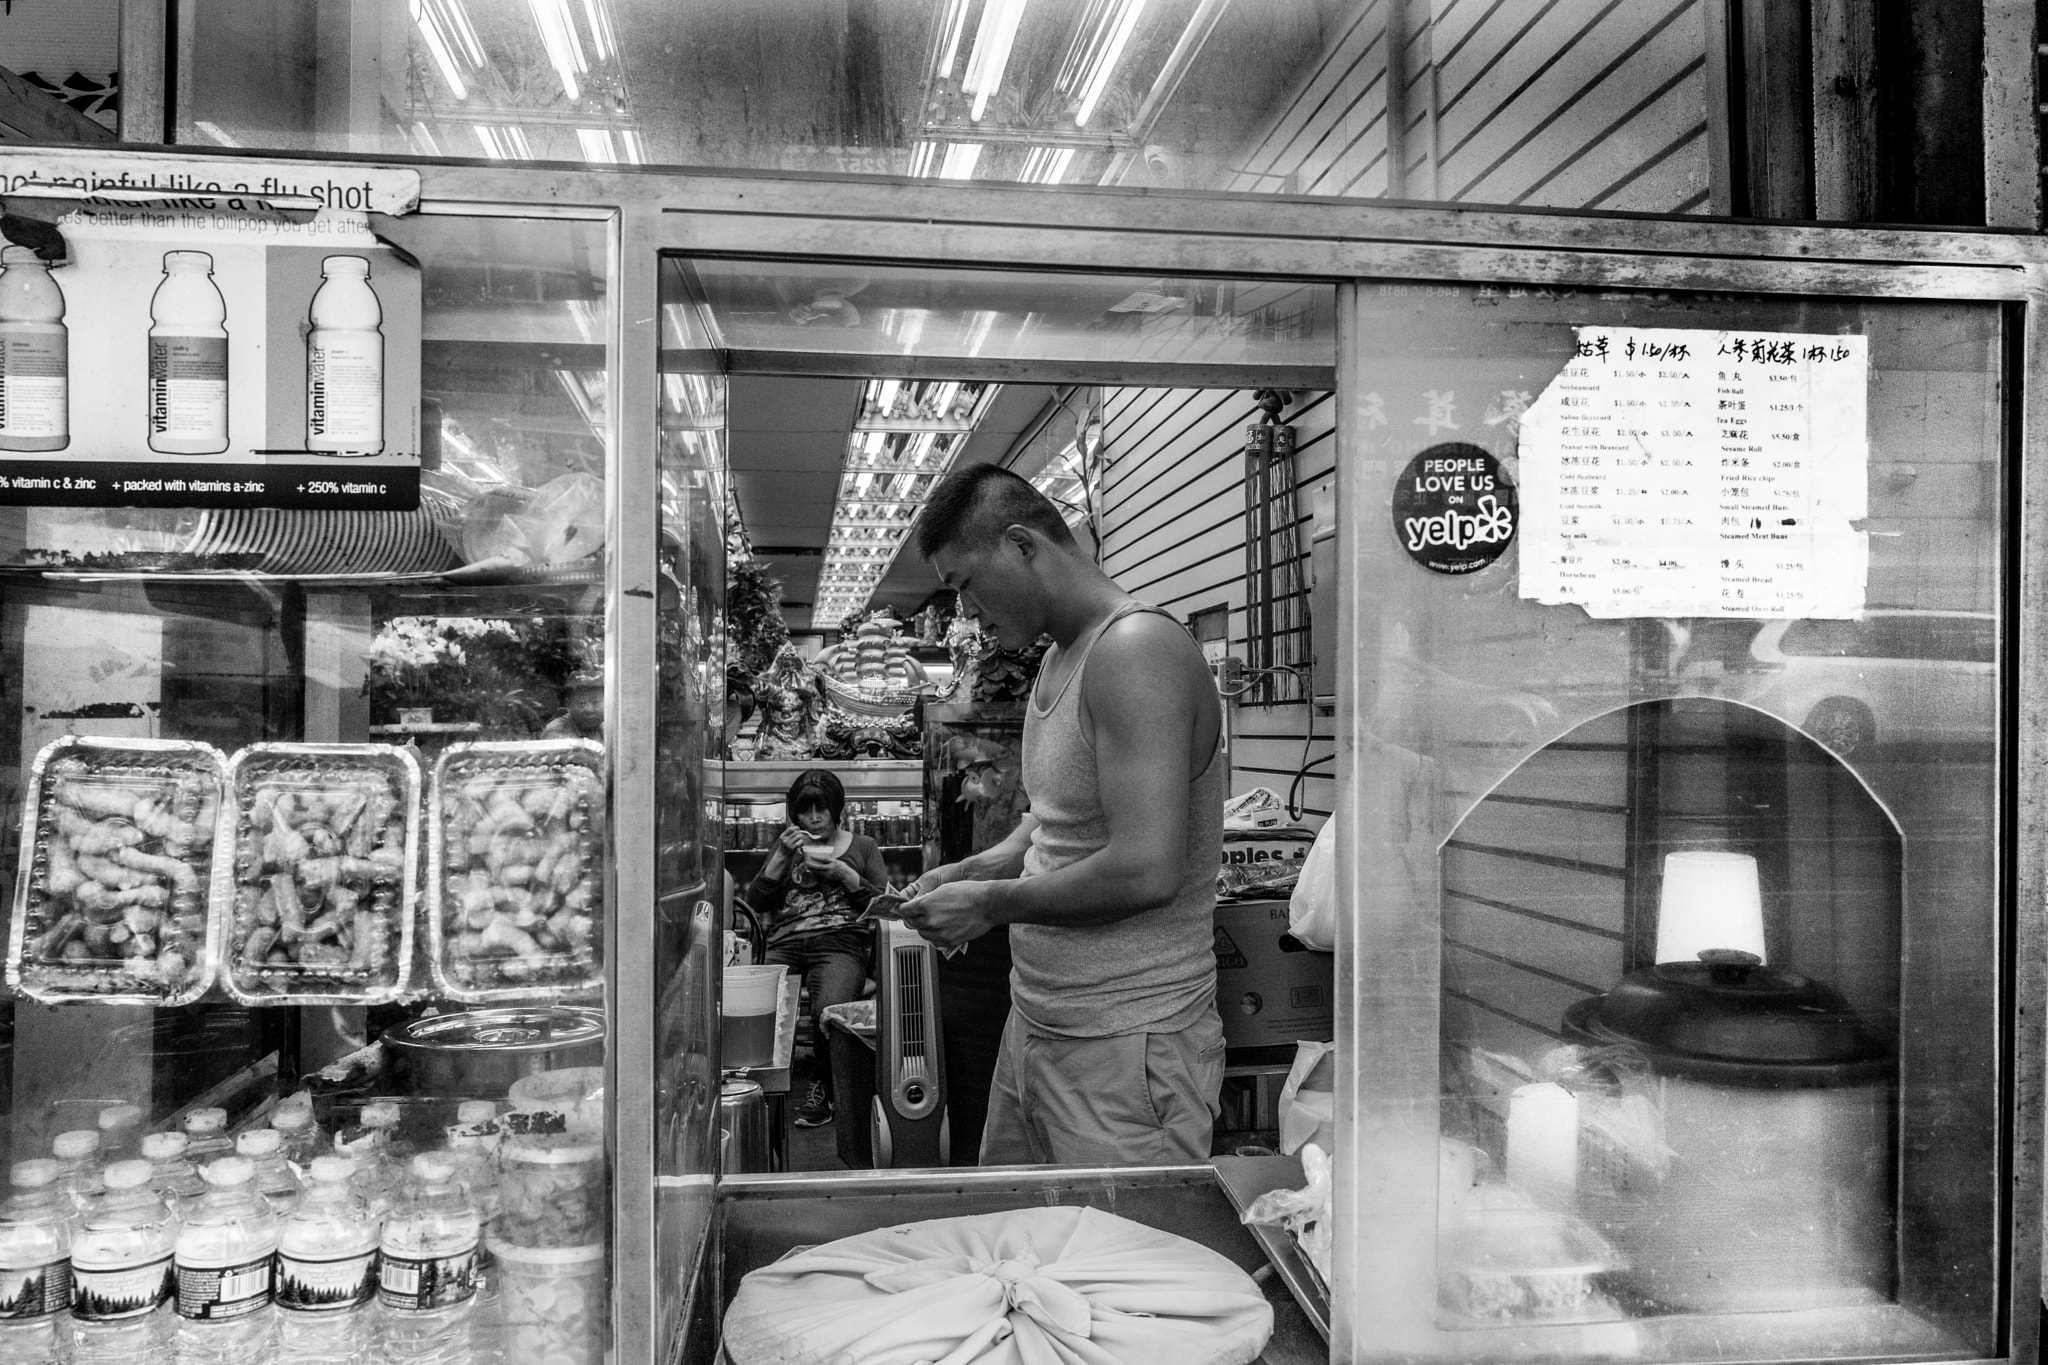 A New York minute - Flushing's snack walk..